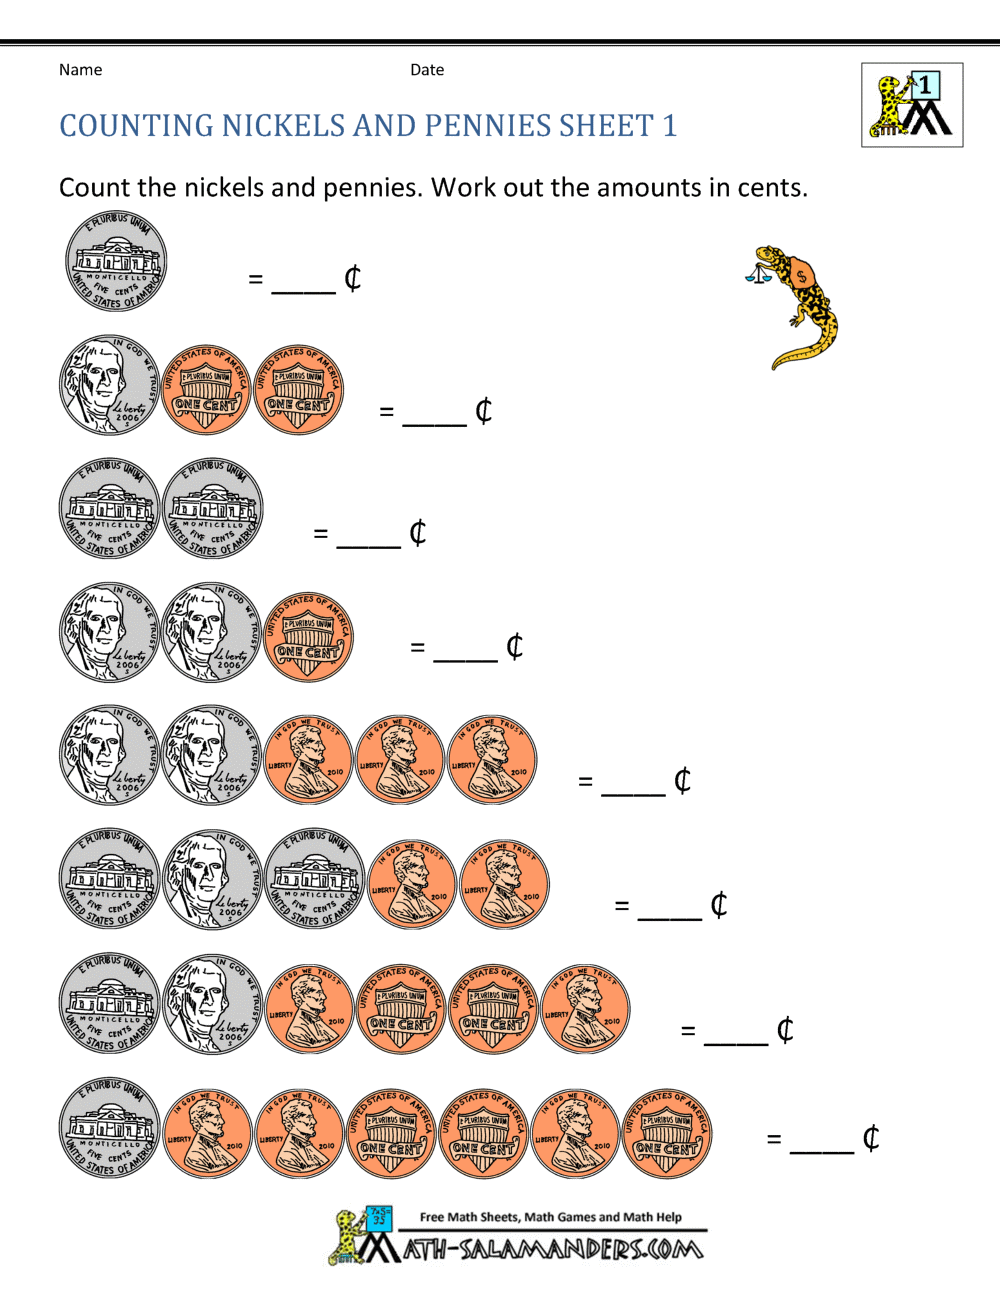 new-769-counting-coins-easy-worksheets-counting-worksheet